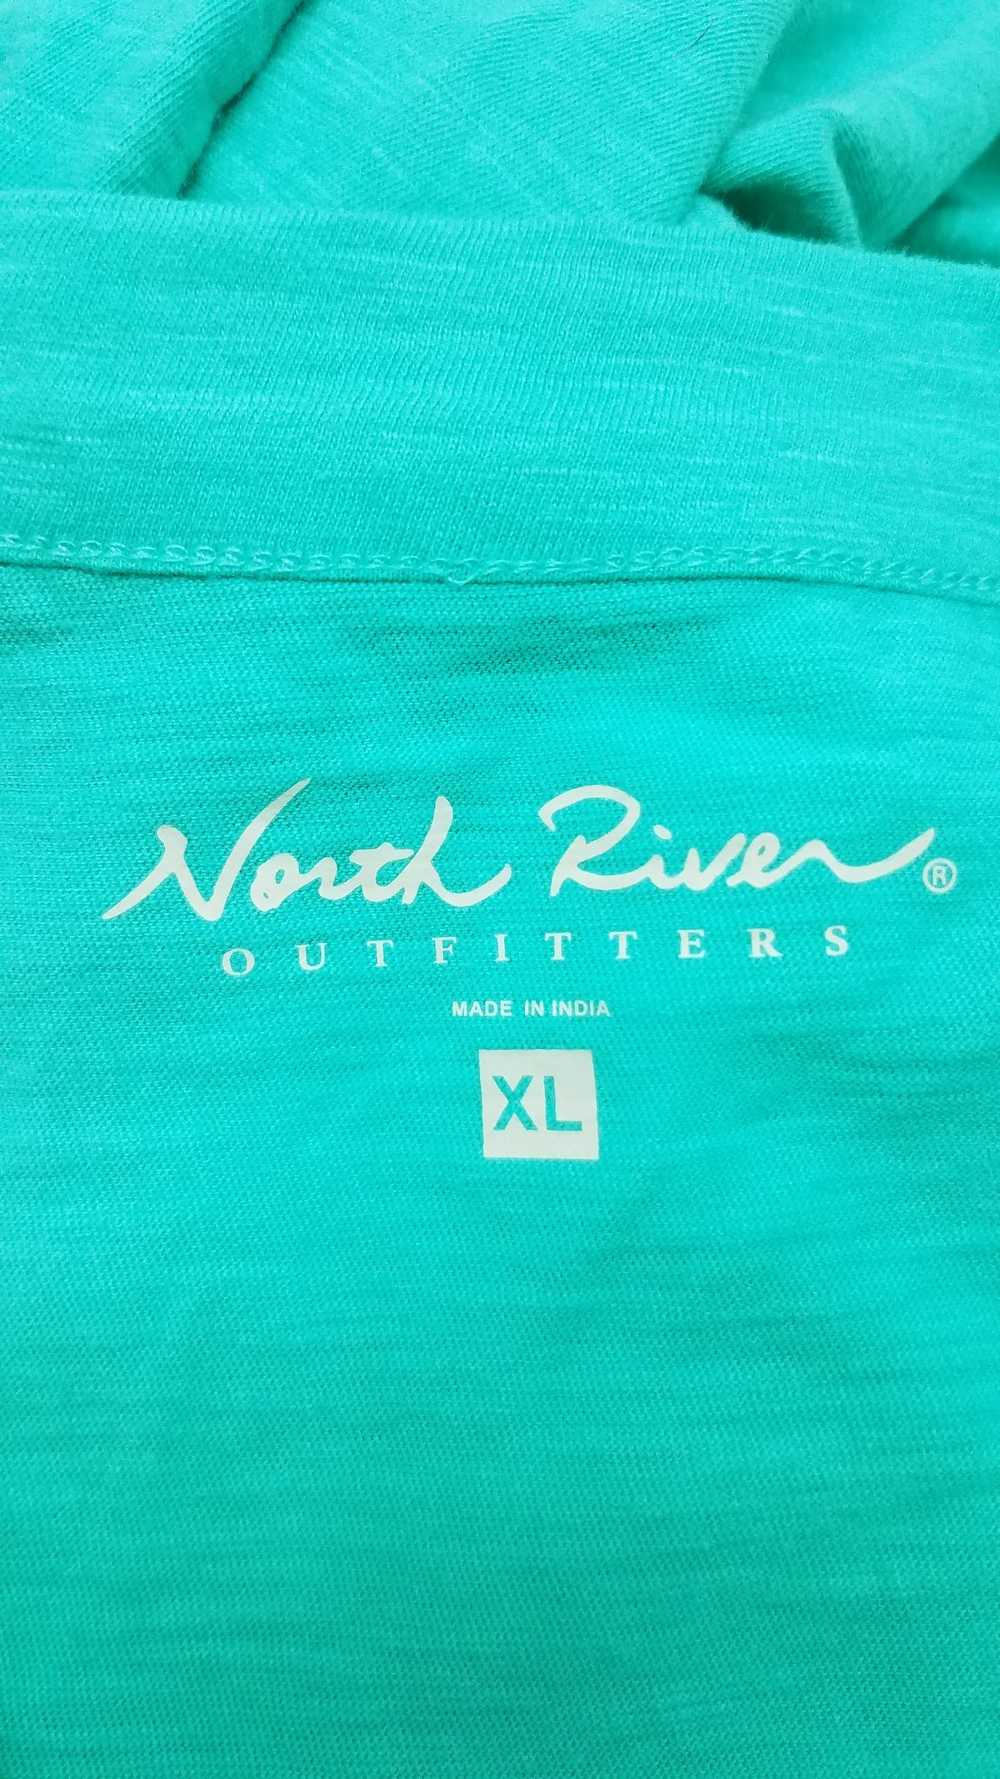 Women's NORTH RIVER Turquoise Blue Top XL - image 3